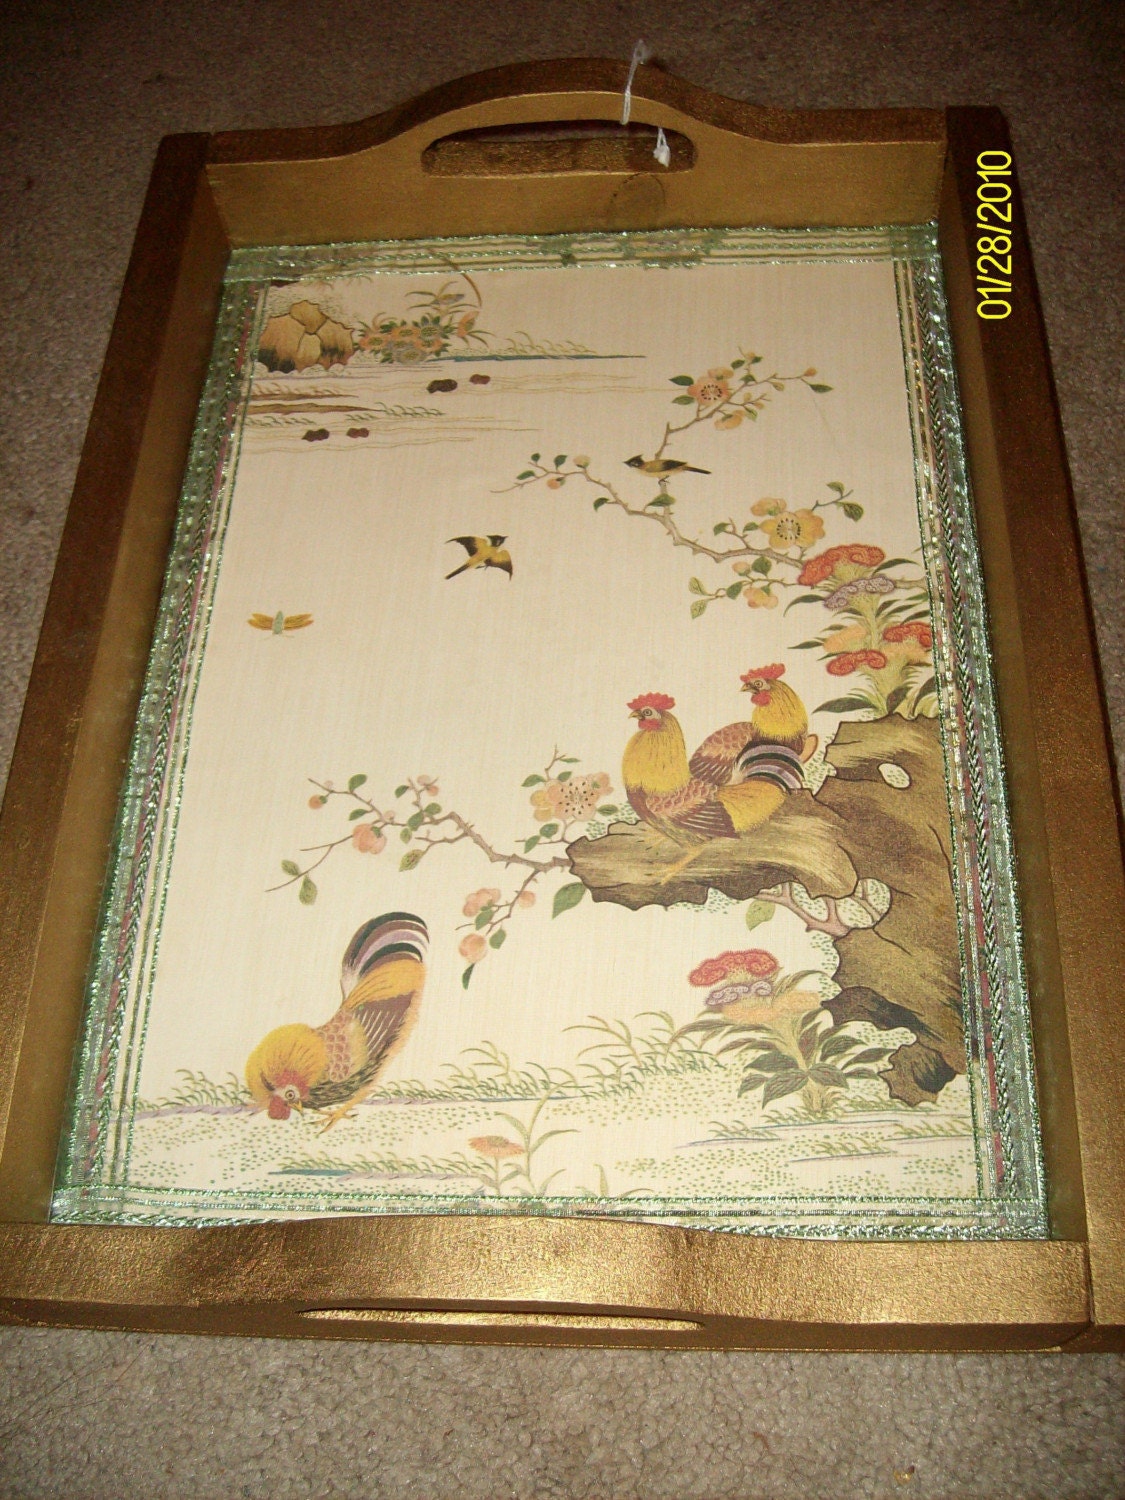 This is a beautiful wooden tray that has been painted gold and then has an oriental printed wallpaper on the bottom with roosters on it.